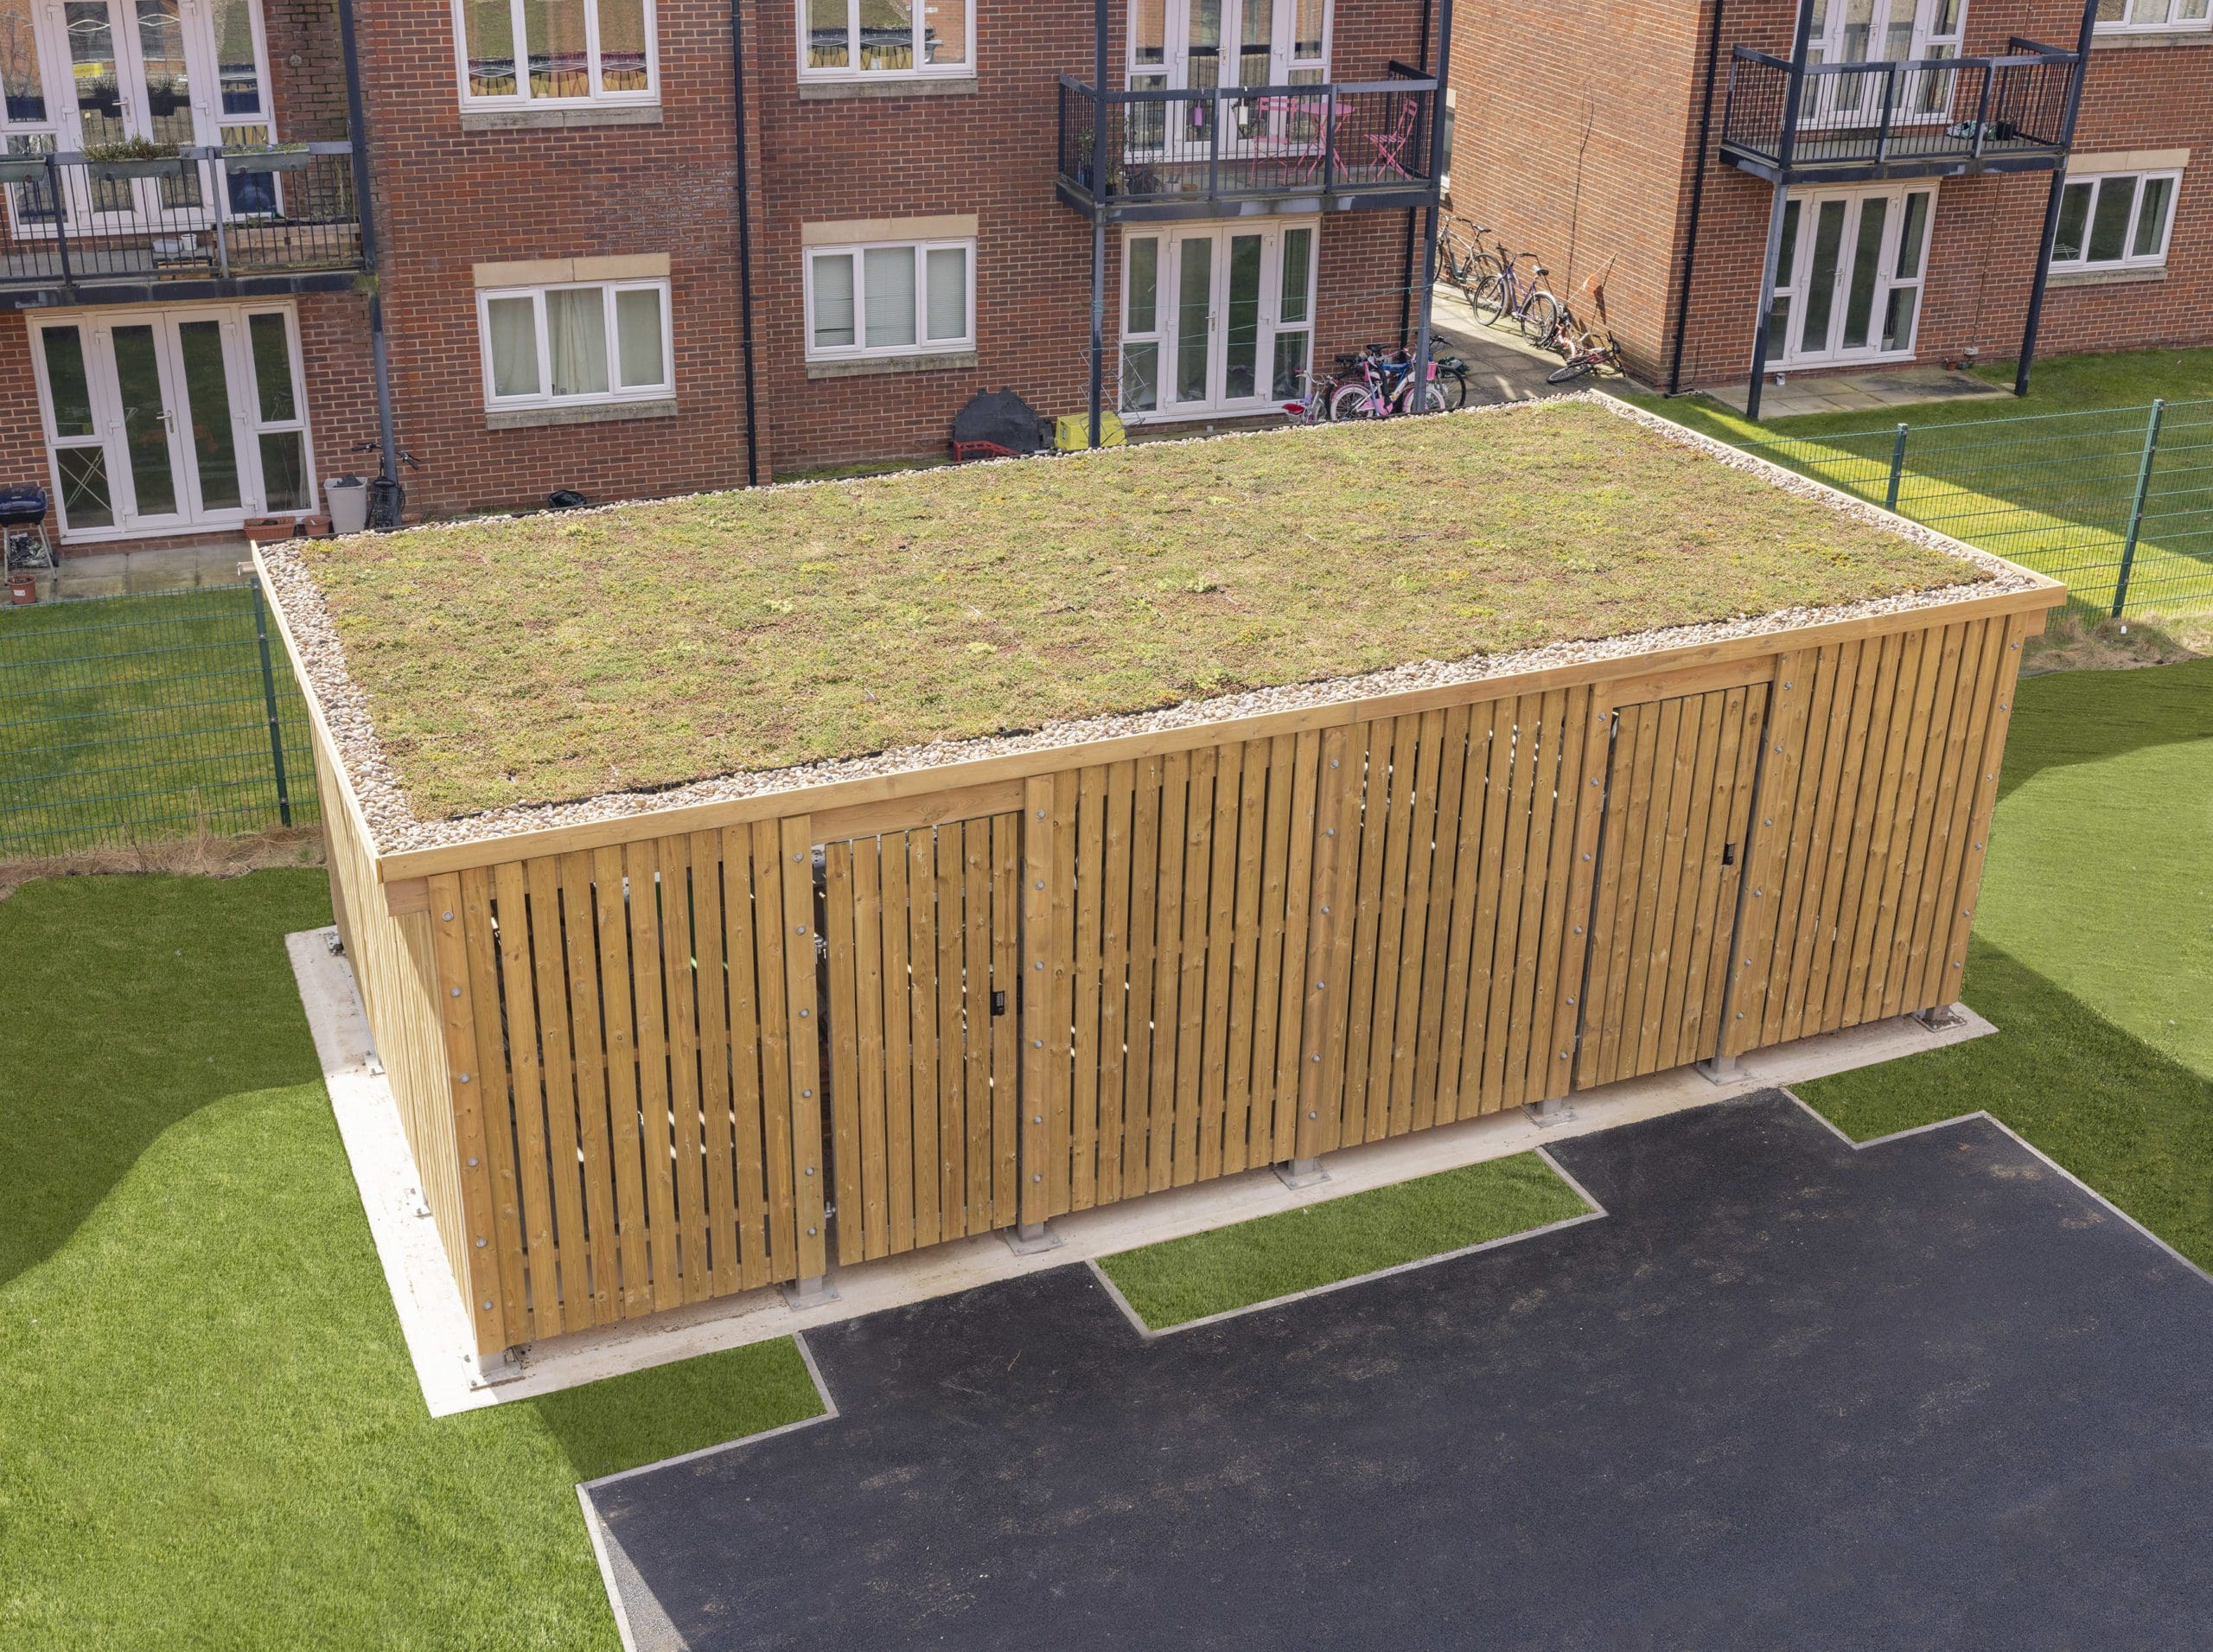 birdseye-view-exterior-cycle-shelter-with-living-roof